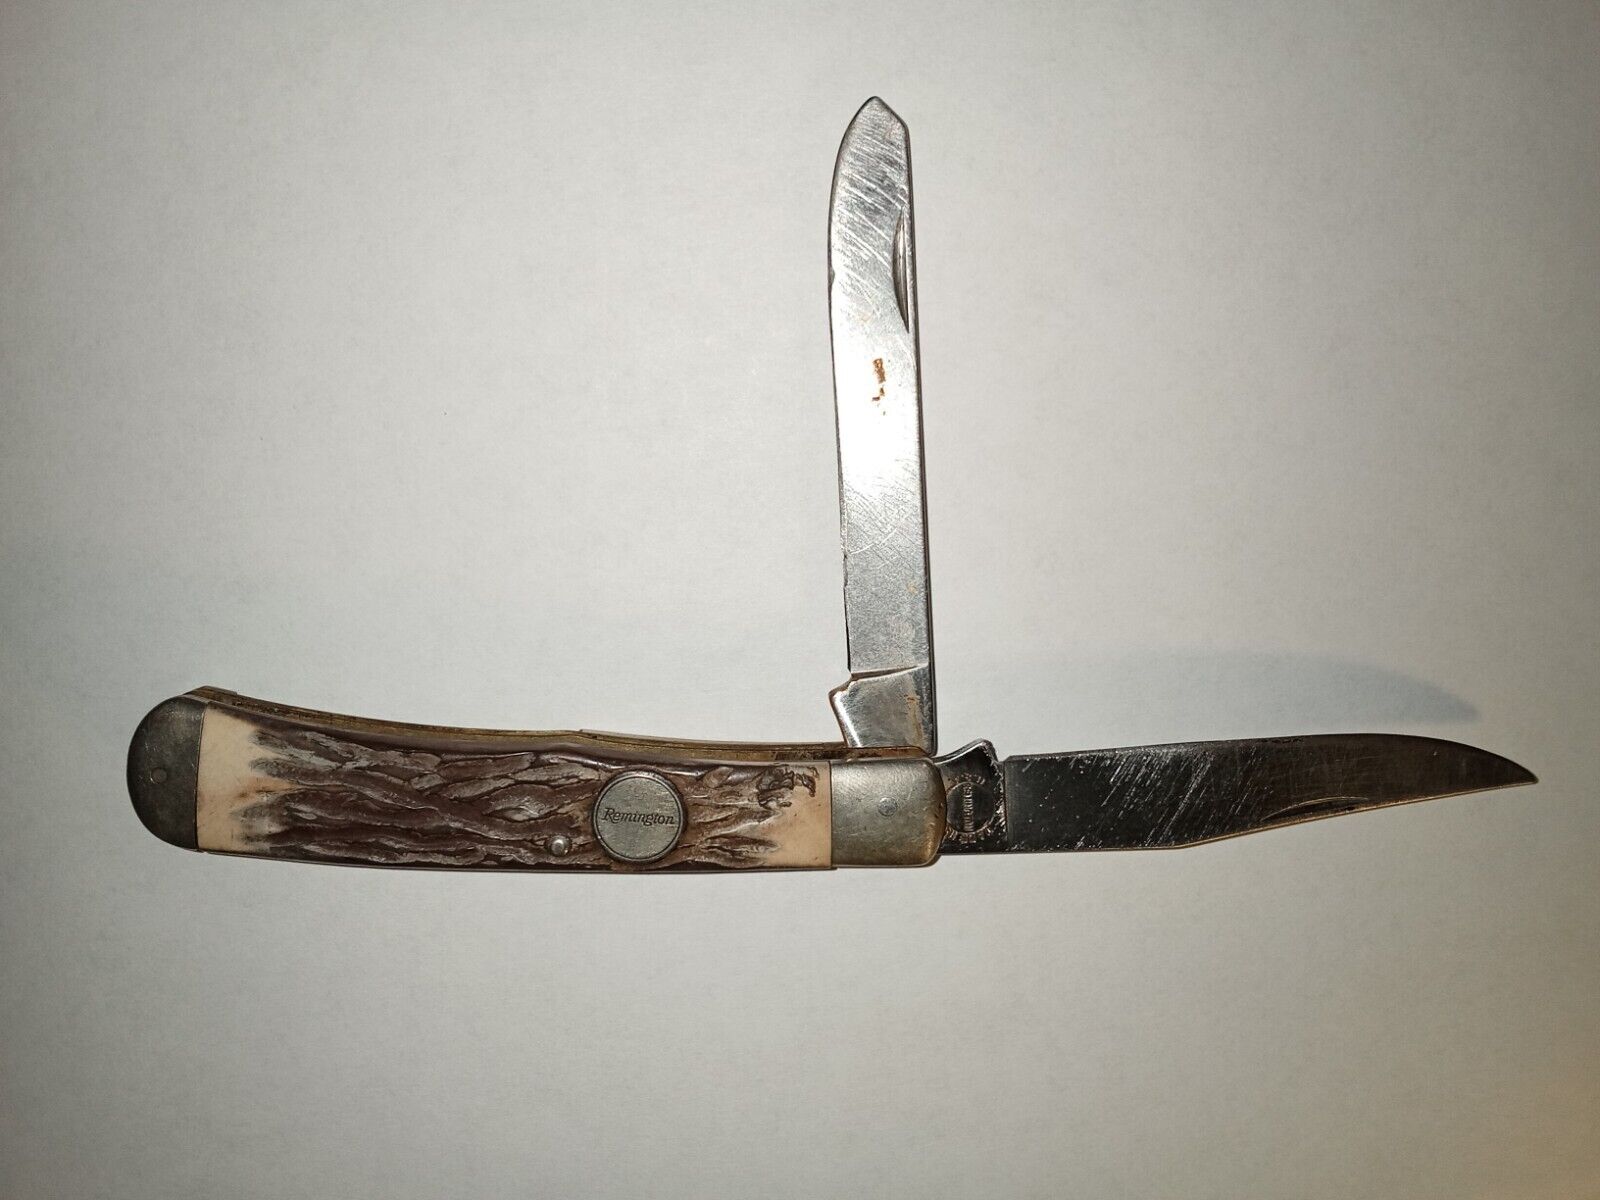 Vtg Remington Model: R12 2 Blade Knife, Needs A Scale Replaced, USA, 3.25